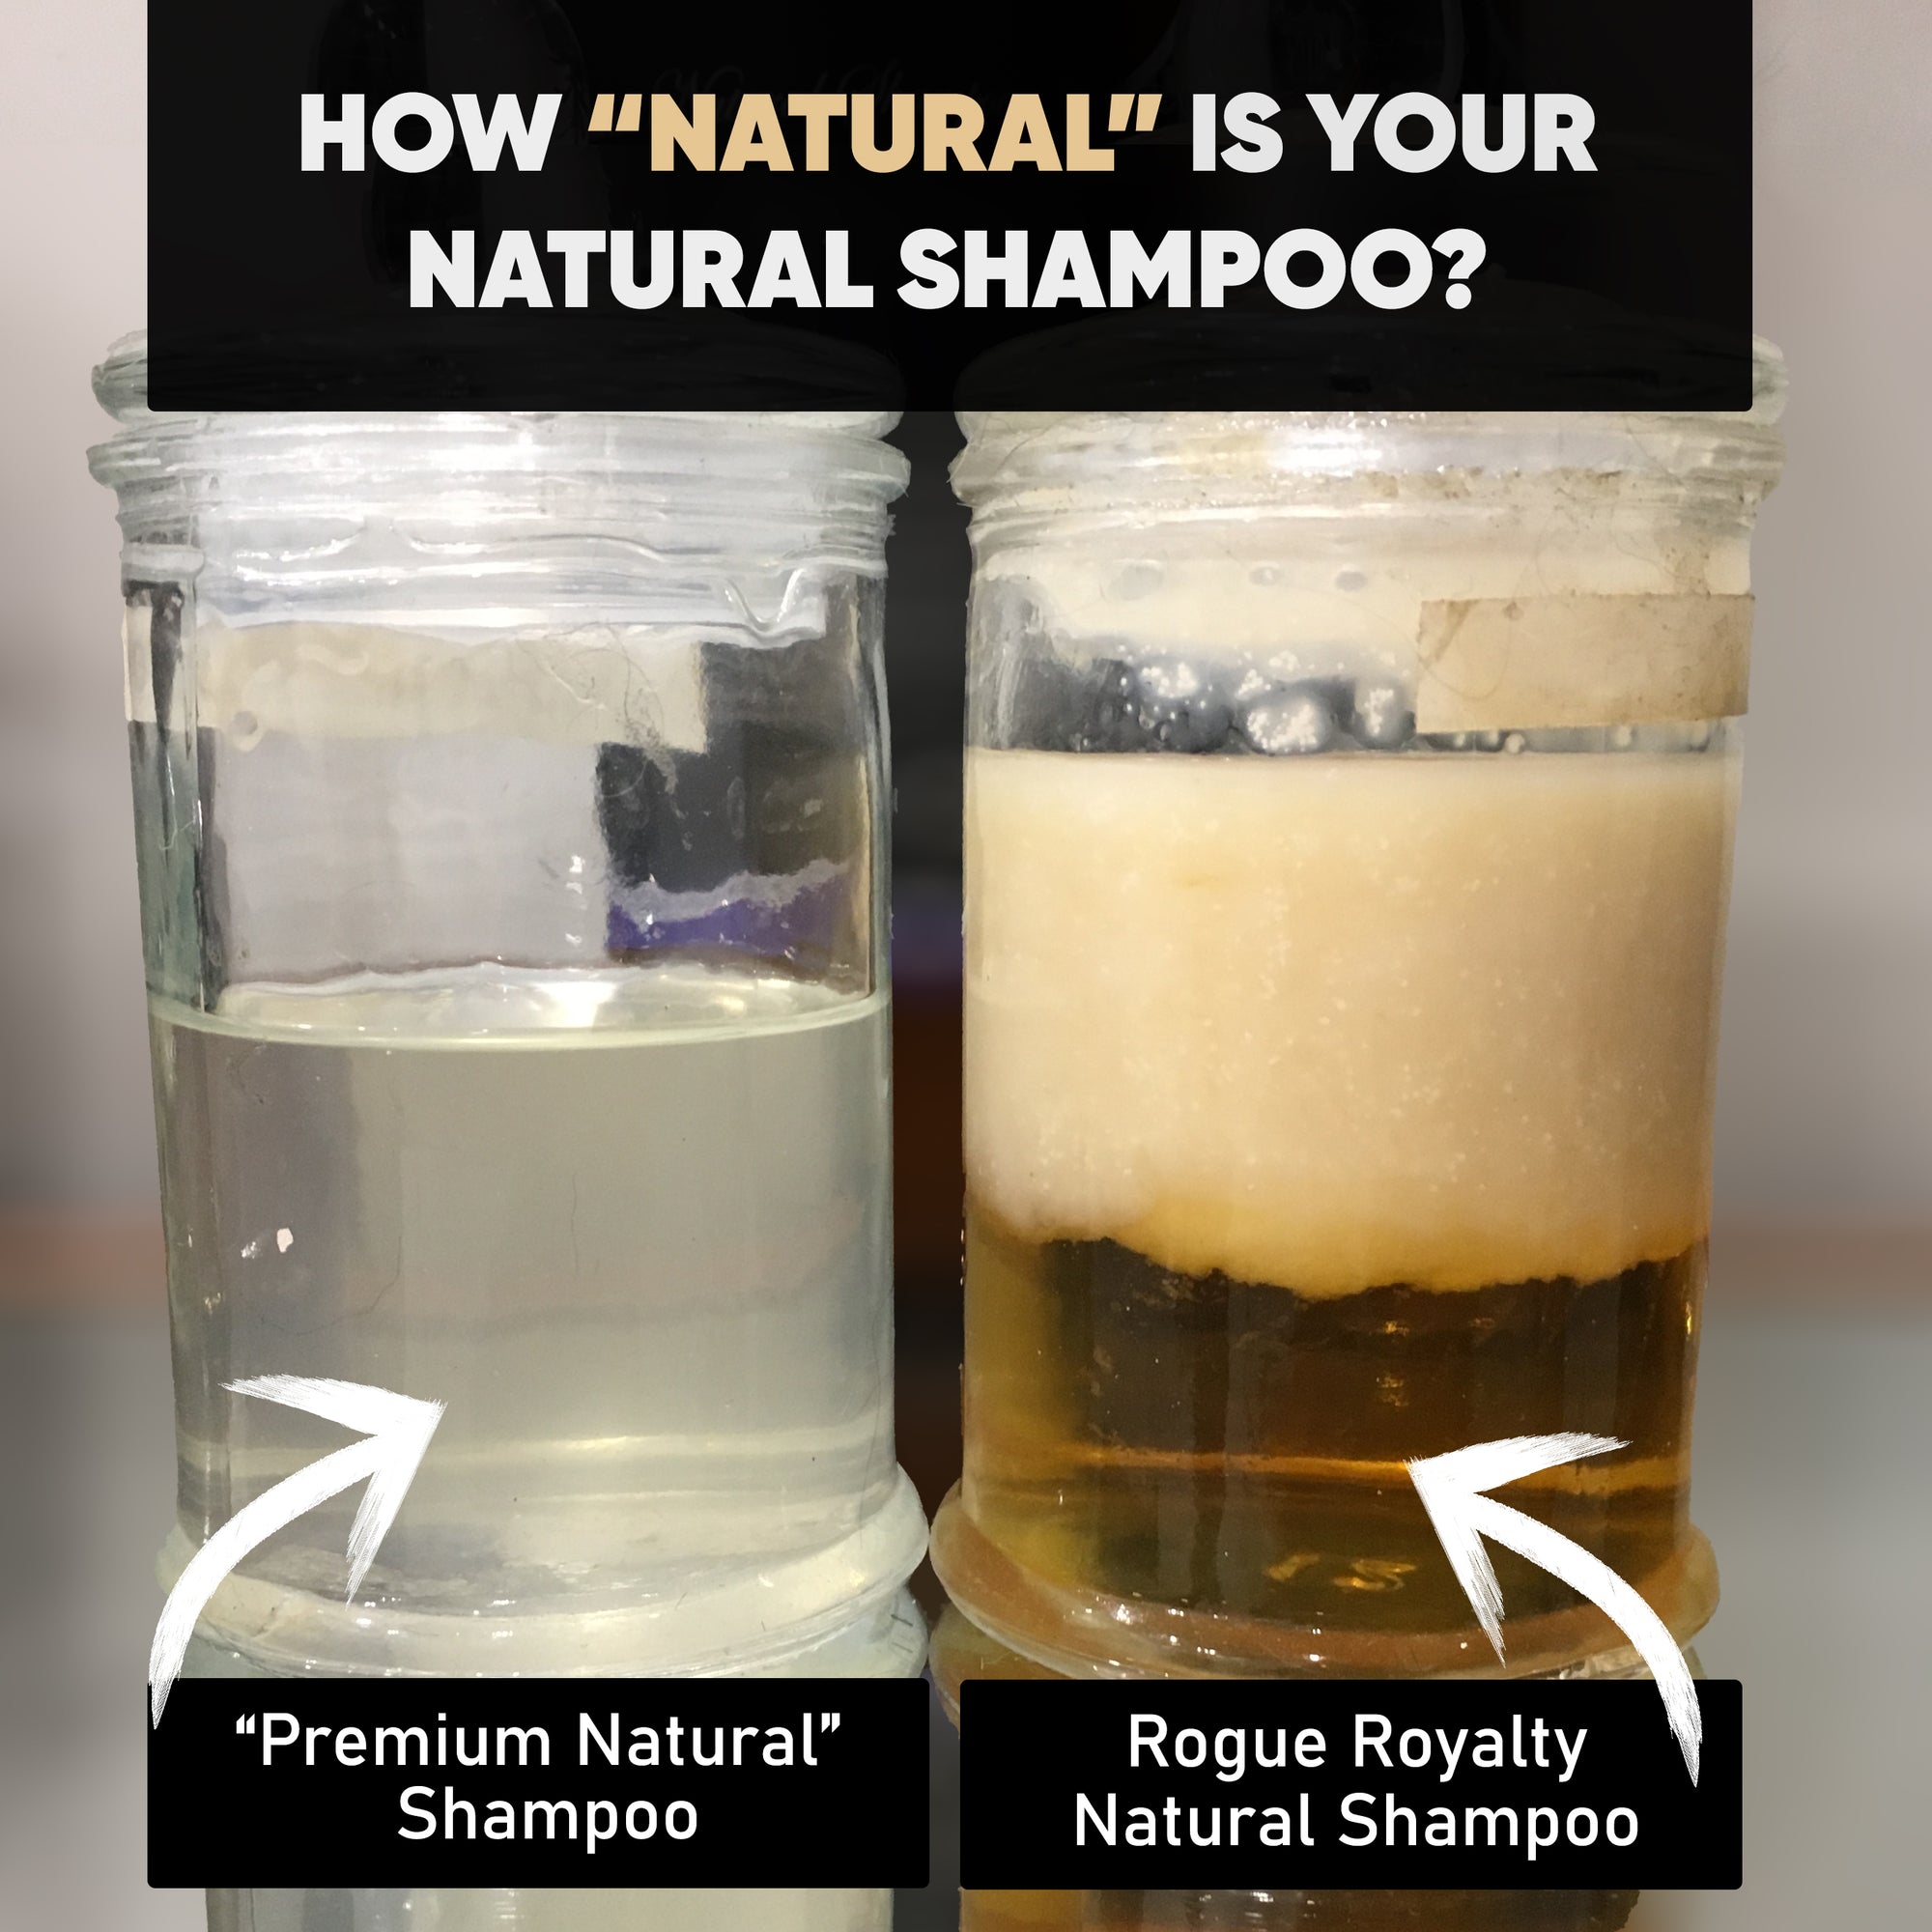 Is your natural shampoo ....natural?